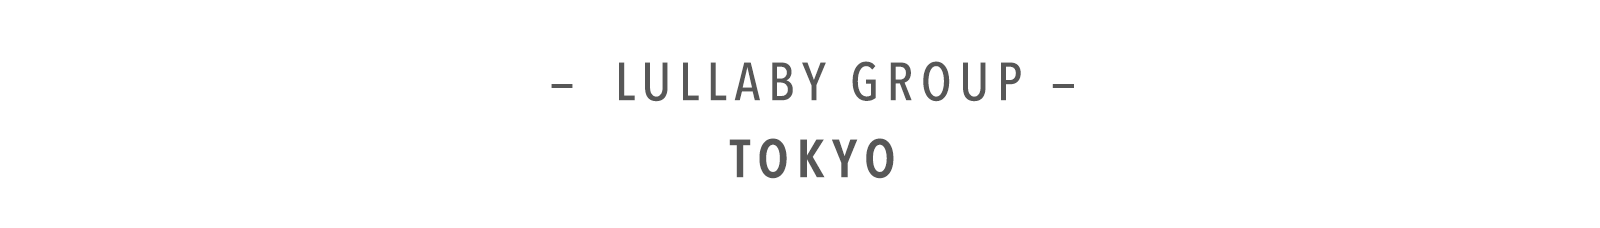 lullaby-group tokyo